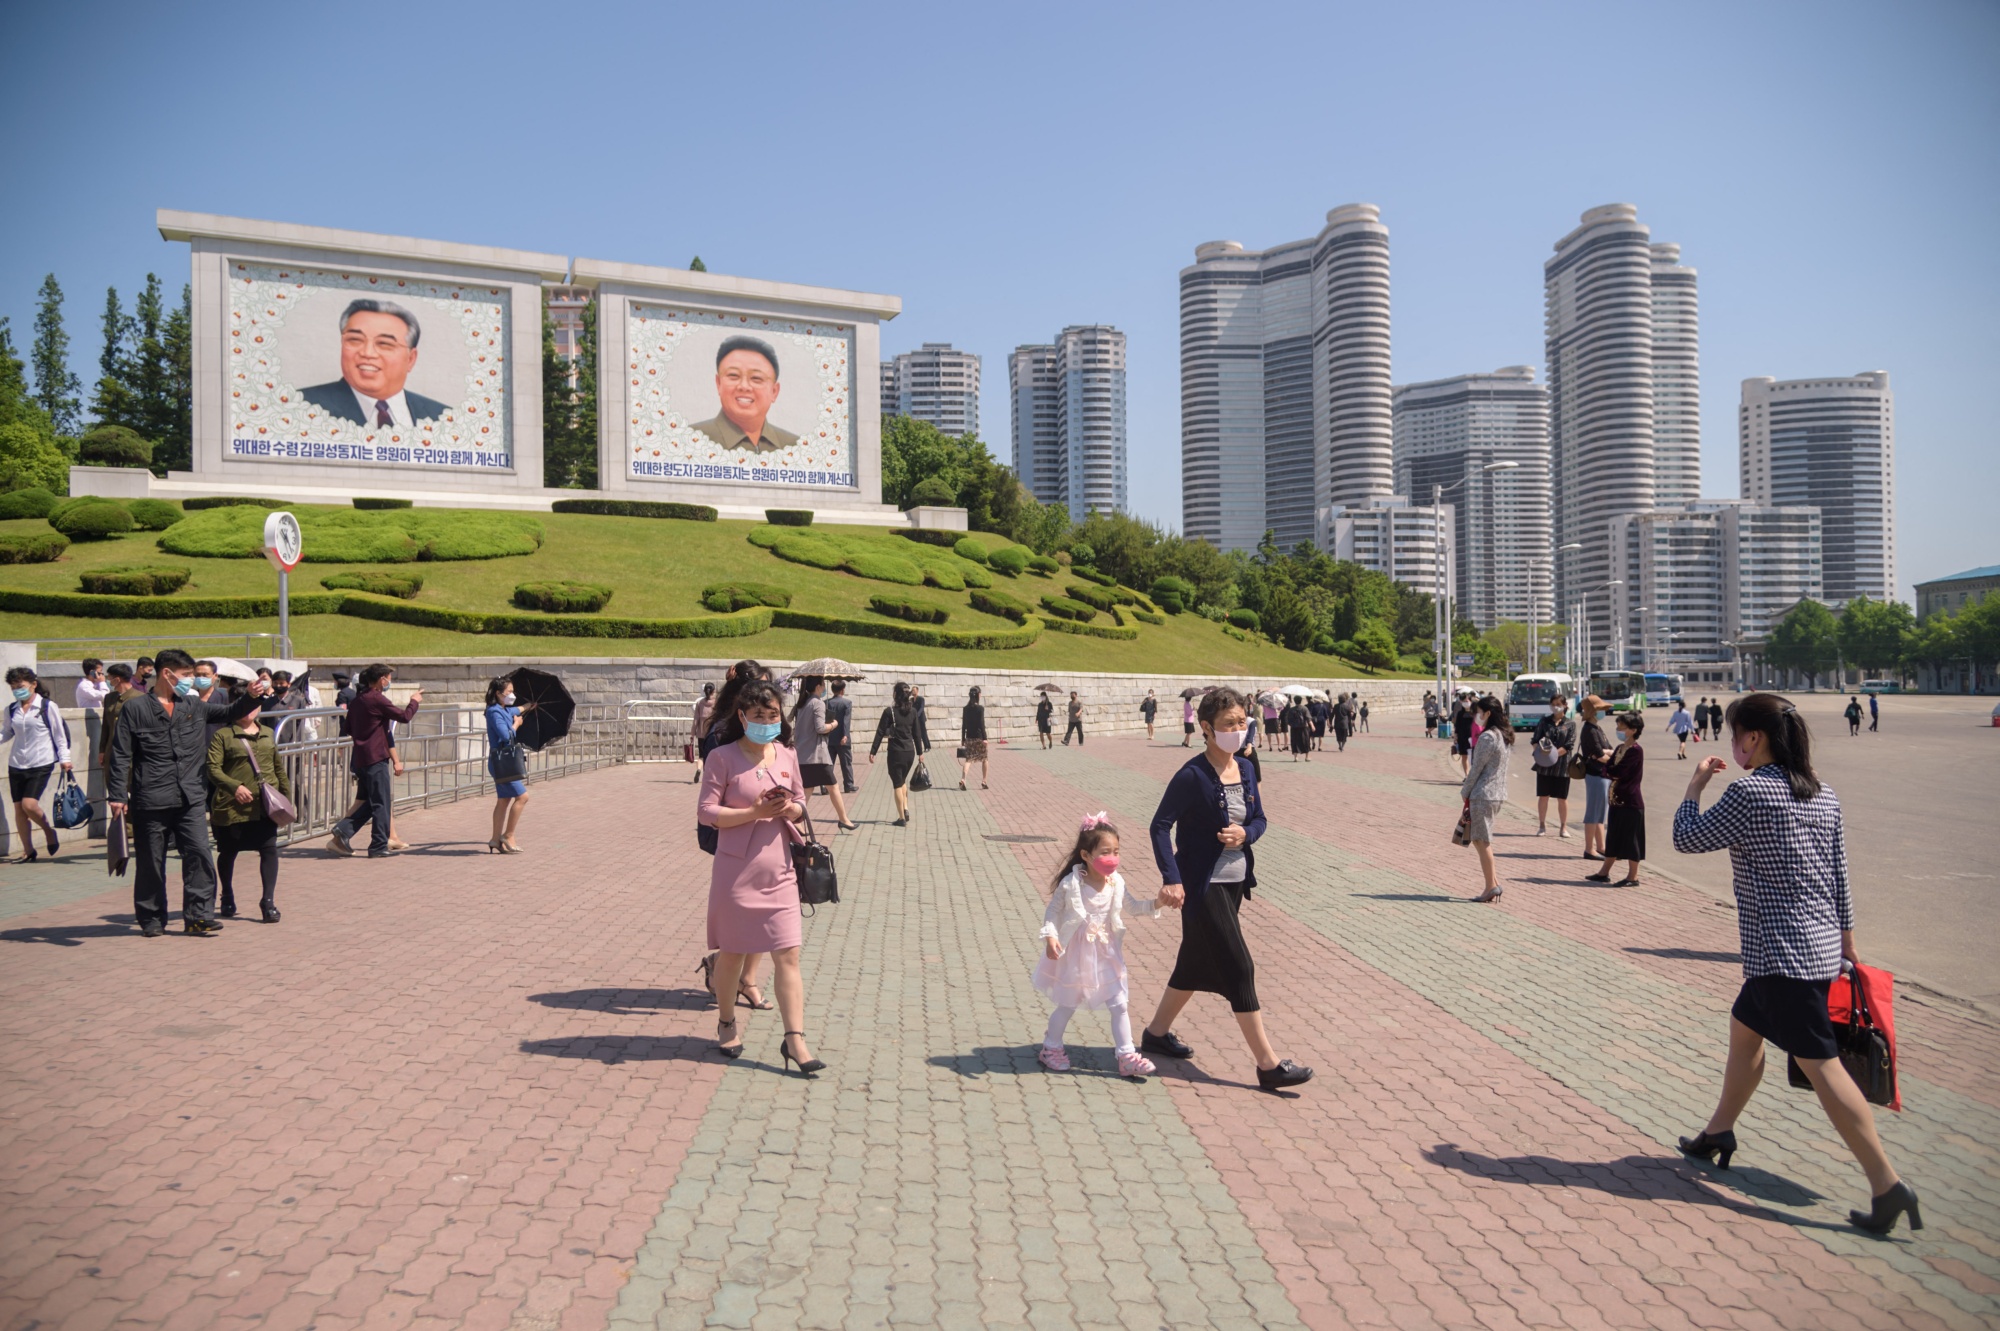 North Korea Informs the United Nations that the US and South Korea are Escalating Tensions on the Peninsula Towards a Potential Nuclear Conflict